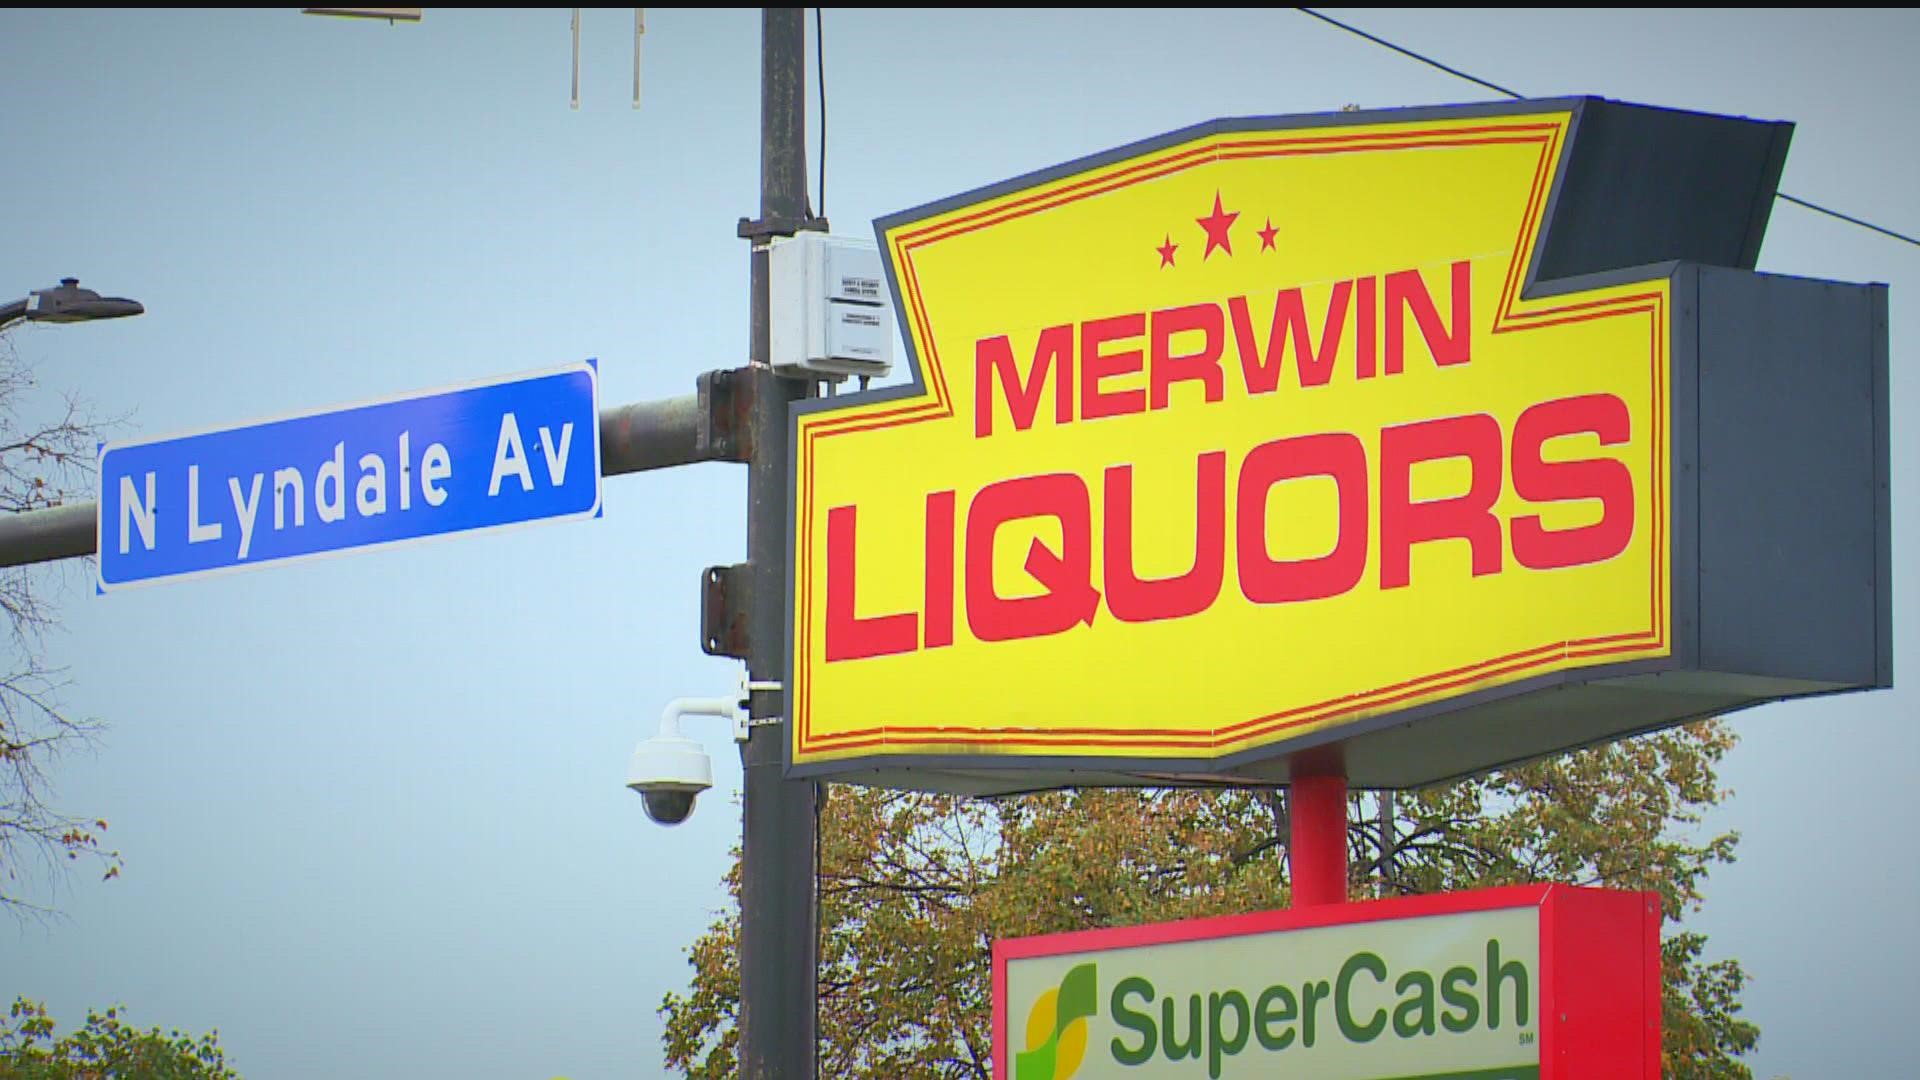 Attorney General Keith Ellison said his office notified Merwin Liquors and Winner Gas Station that "illegal public nuisances" are happening at the properties.